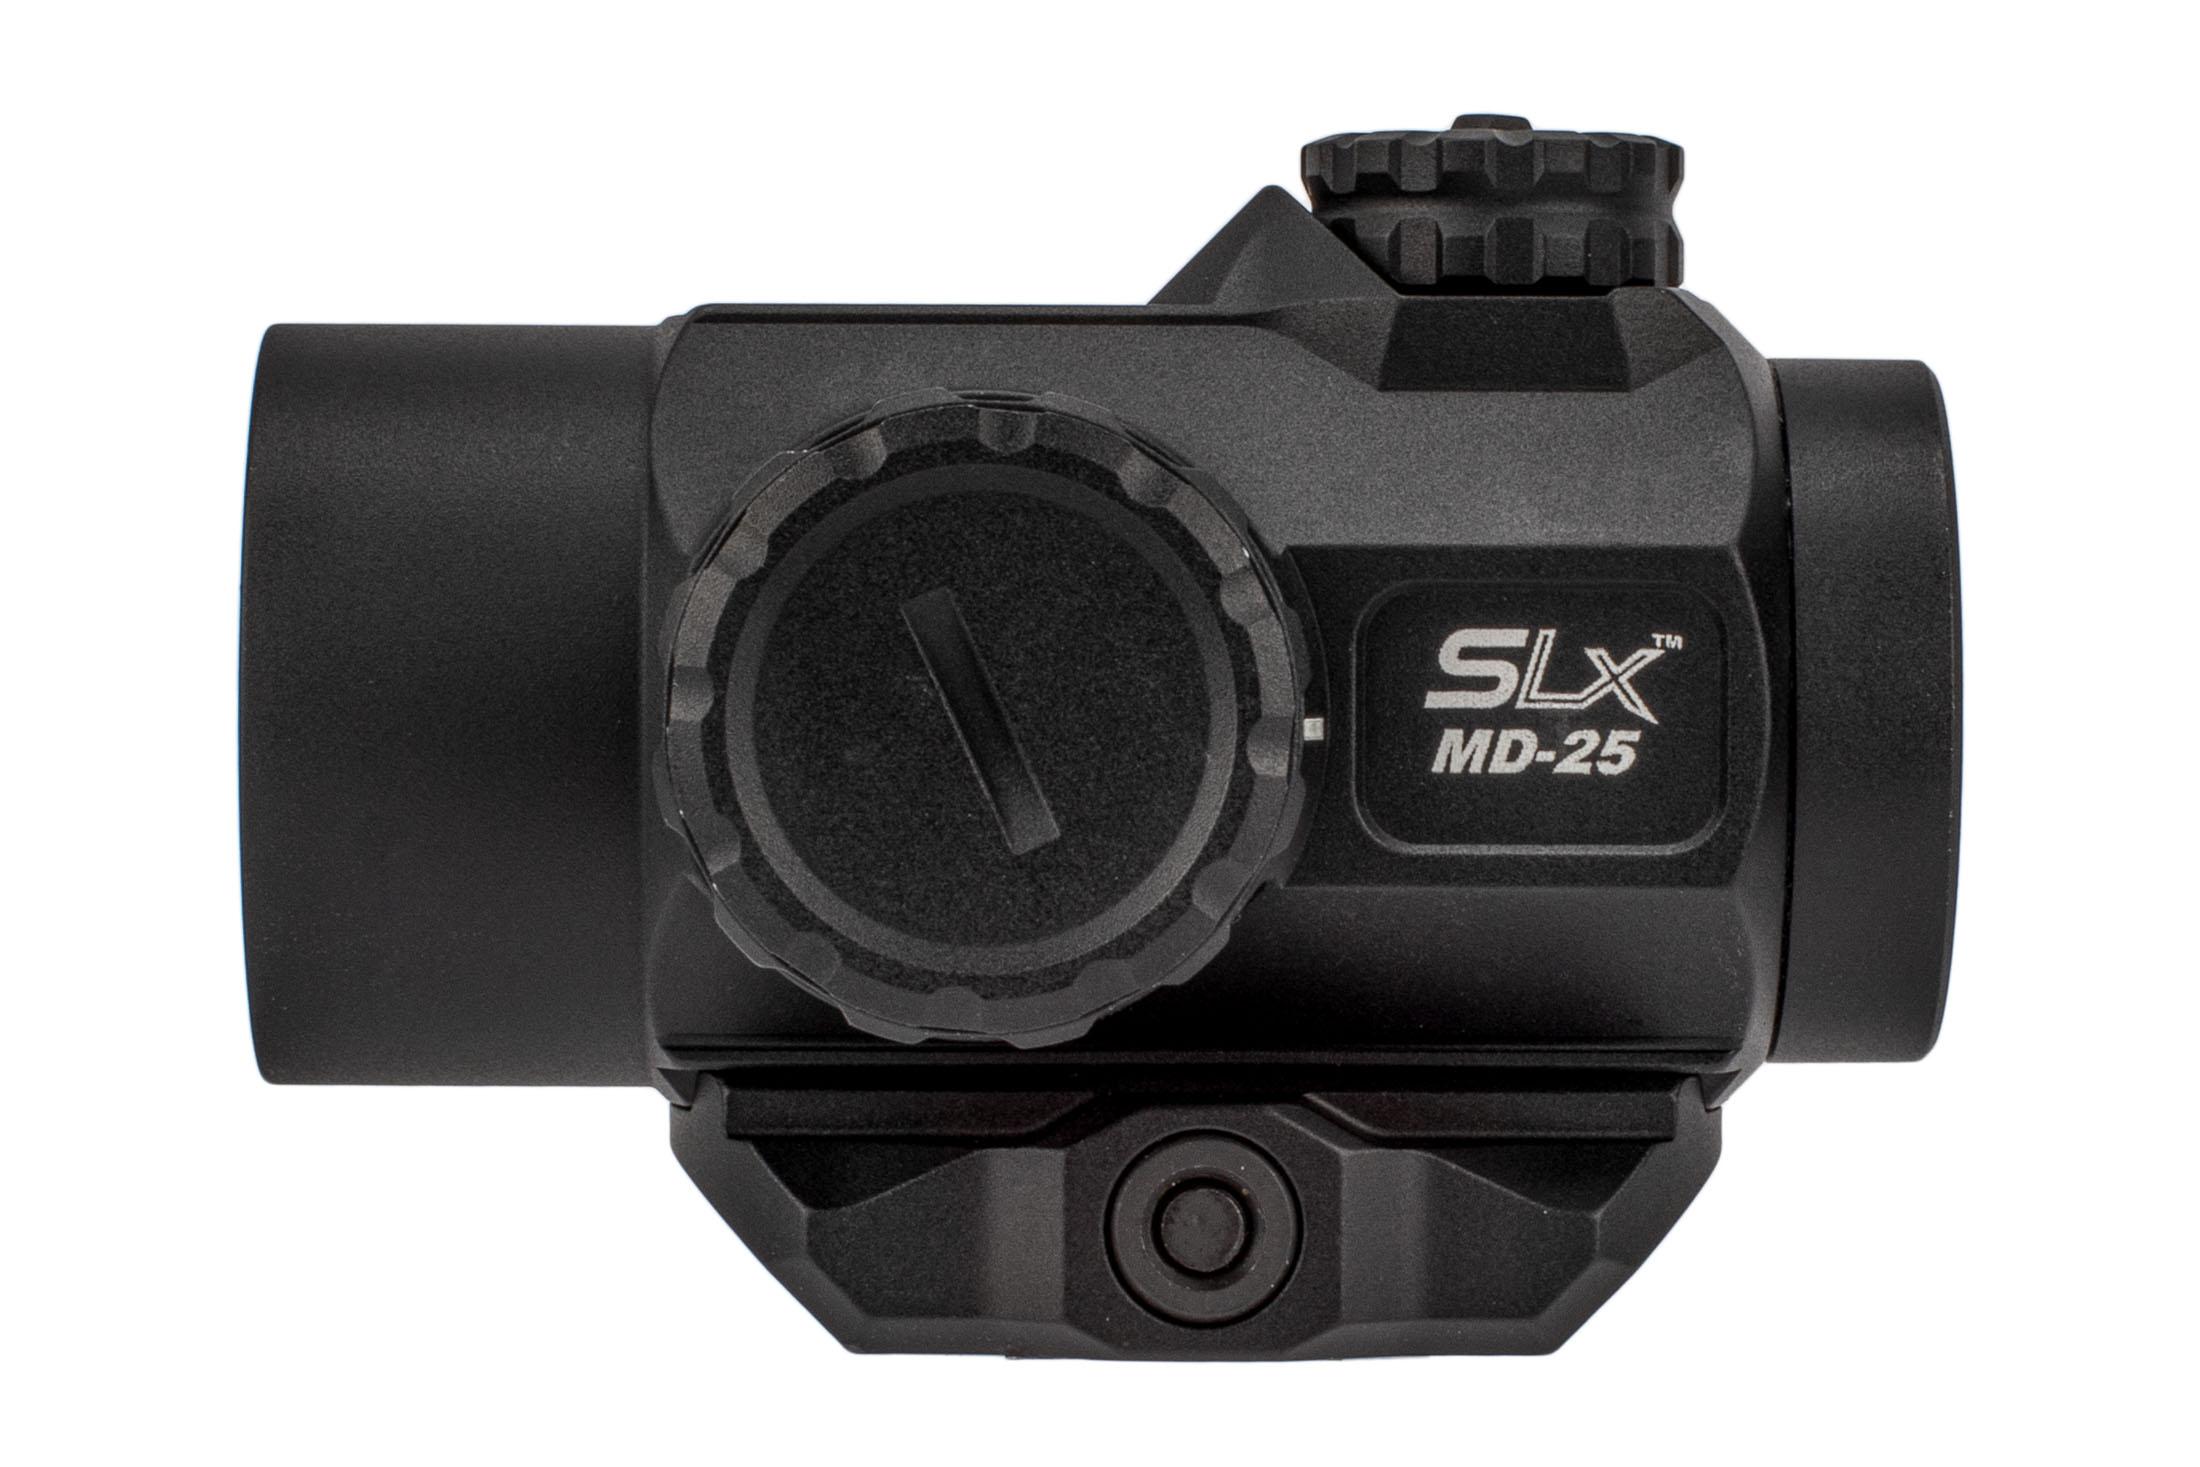 Primary Arms SLx MD-25 Rotary Knob 25mm Microdot - 2 MOA Red Dot 